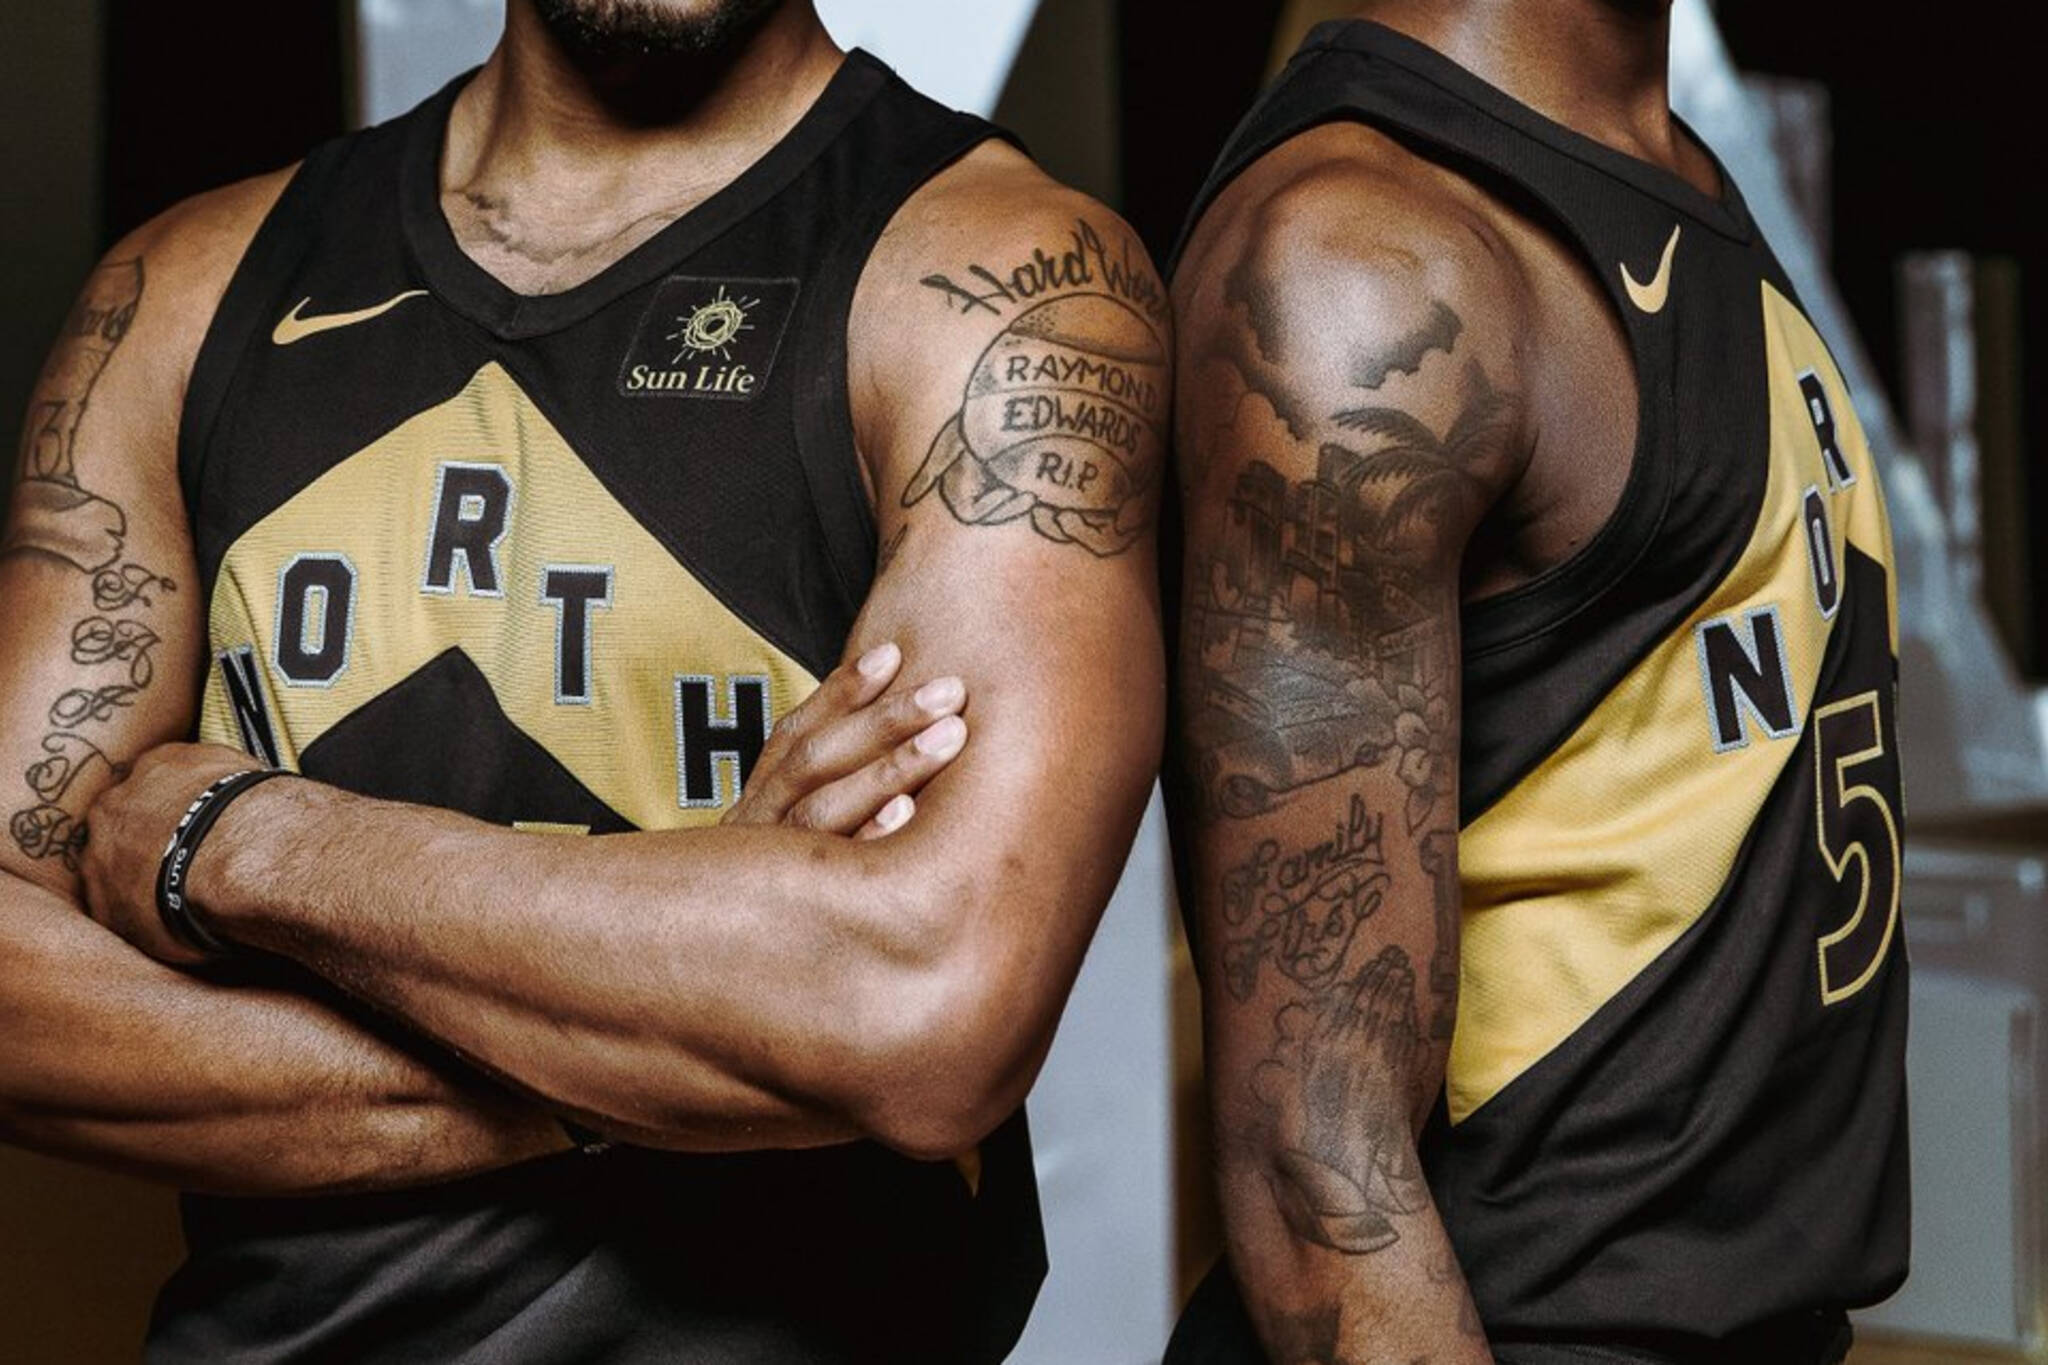 A new gold-coloured Toronto Raptors jersey may have just leaked